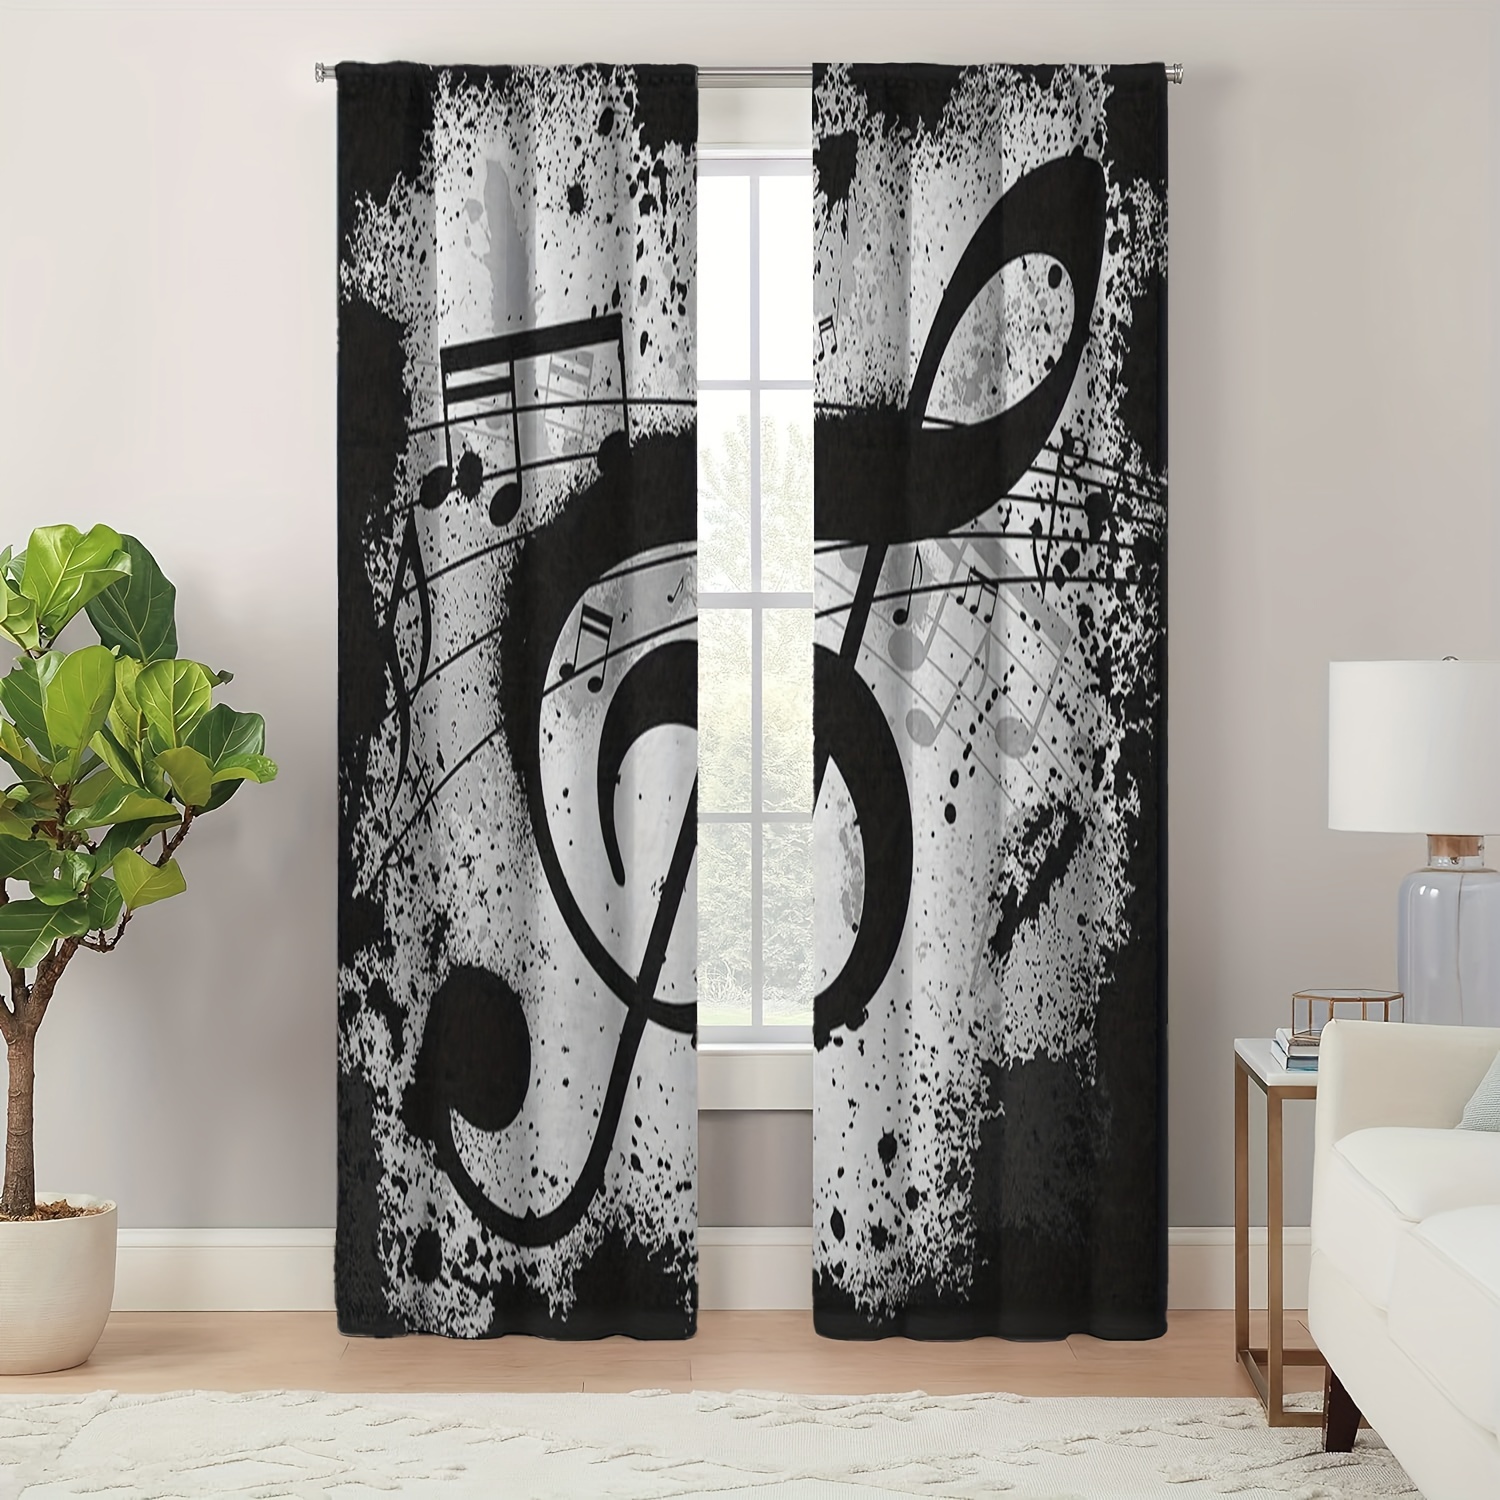 

Boho Style Jacquard Doorway Curtains With Tie Back - 2 Panel Set, Artsy Musical Notes Design, Polyester Black And White Living Room Darkening Panels, Machine Washable Curtain Set With Tiebacks